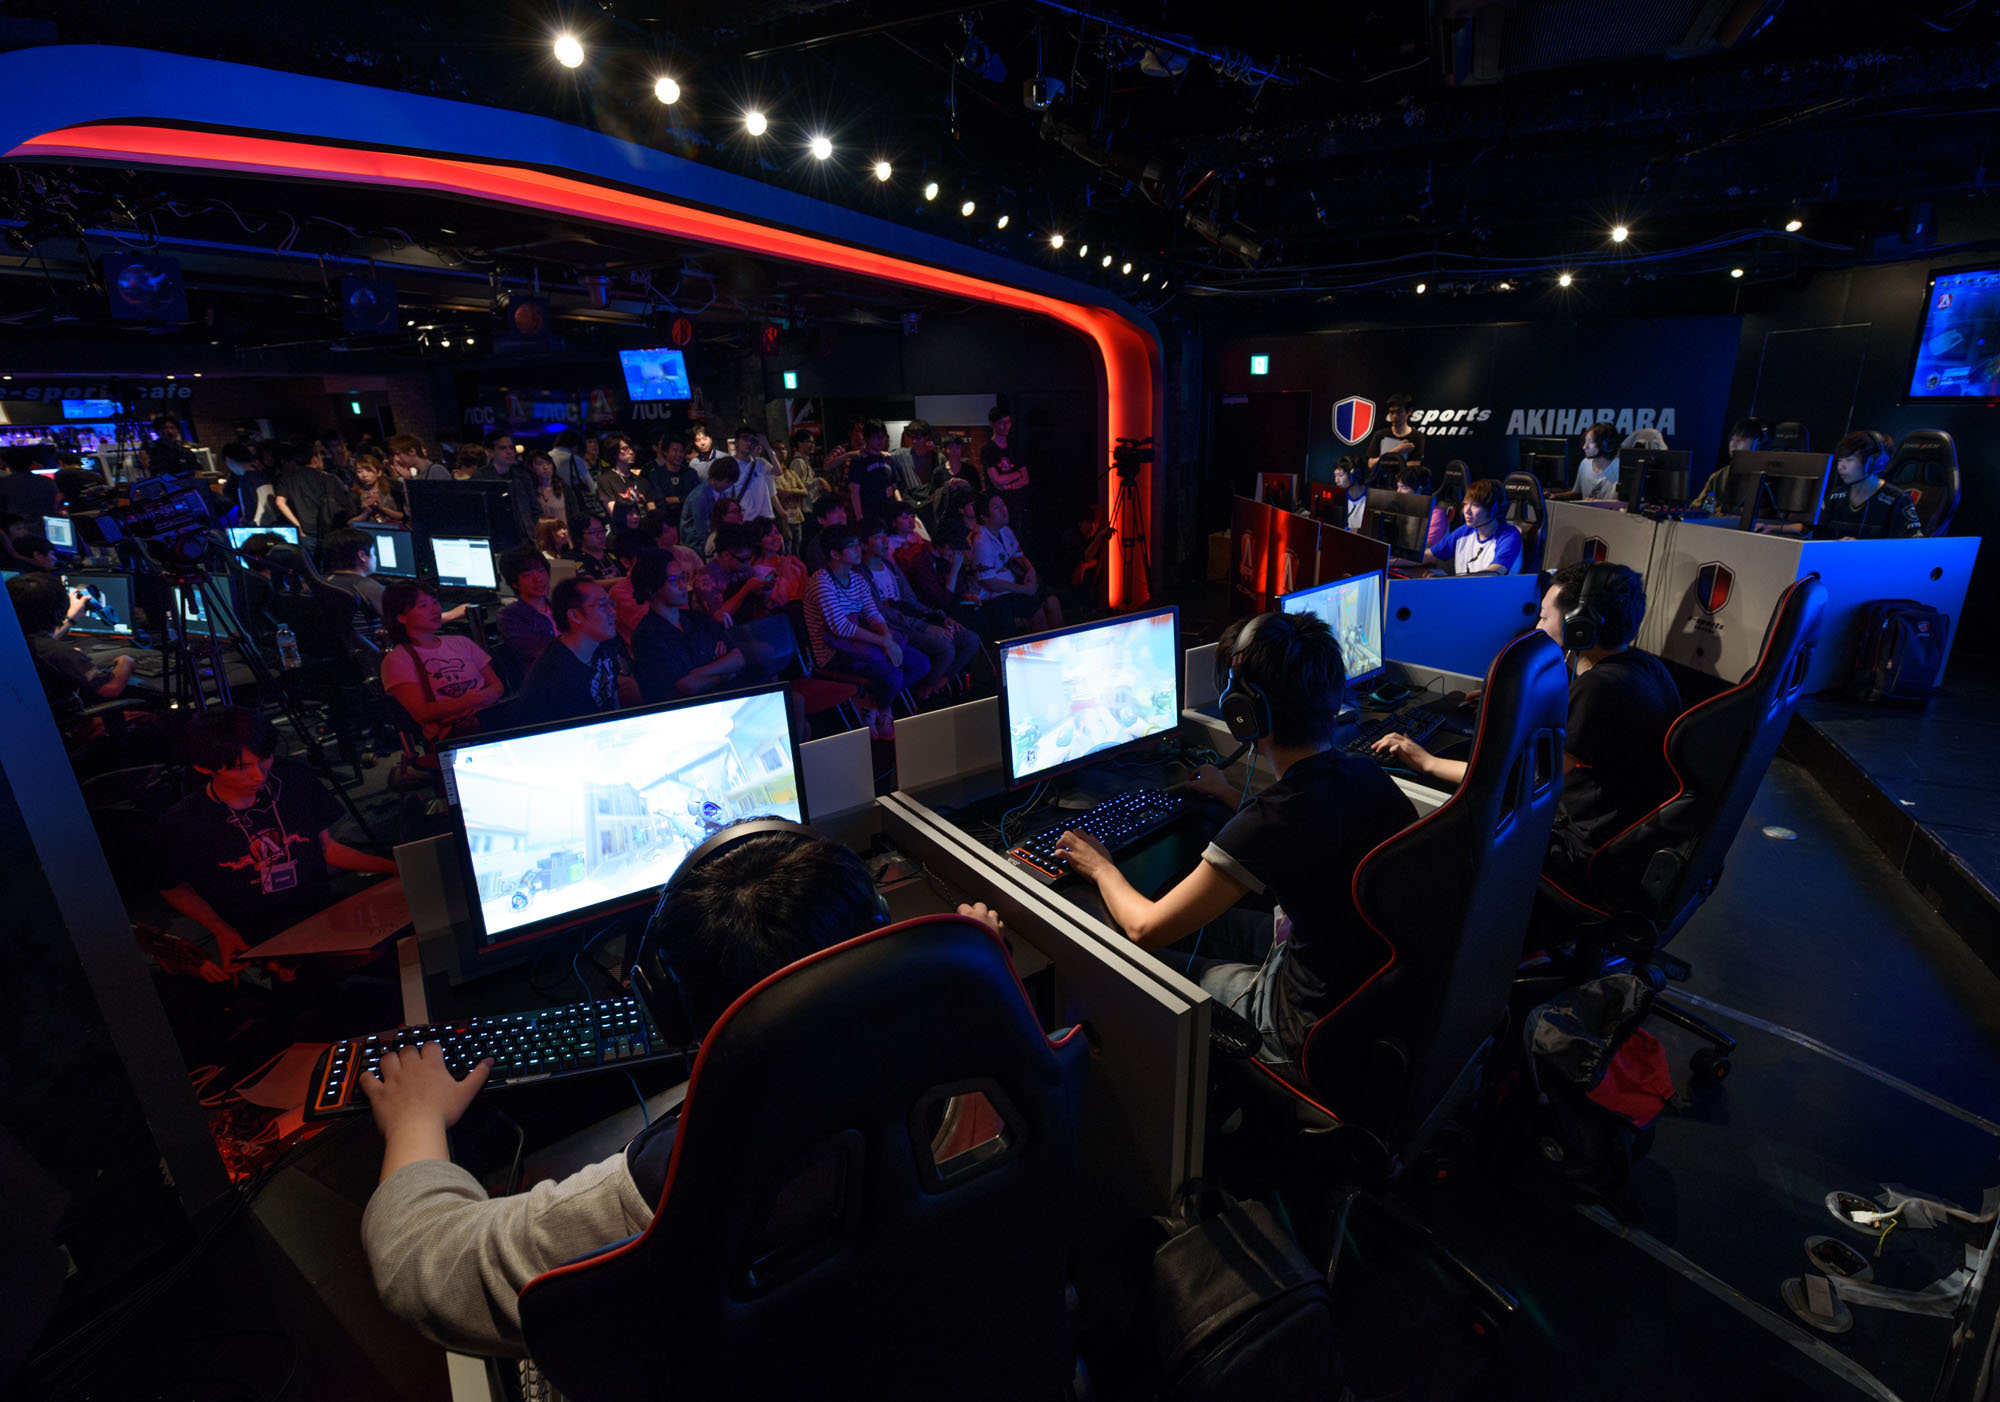 Attendees play Activision Blizzard Inc.'s Overwatch game at the AOC Open e-Sports event in Tokyo on July 1. Japan has been slow to embrace e-sports, but that may change. | BLOOMBERG